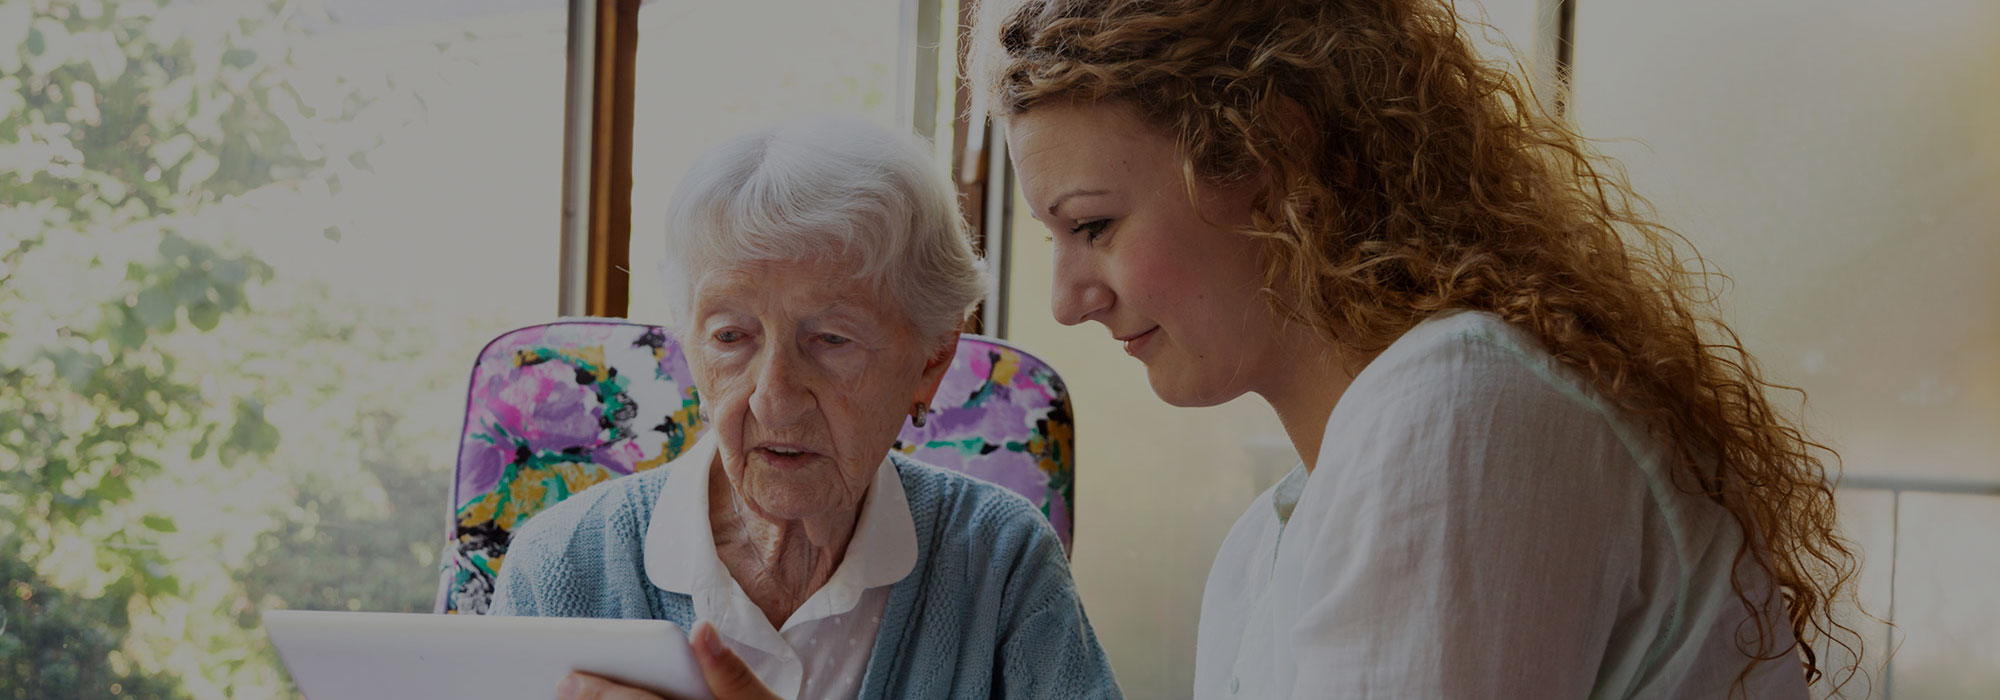 Kindred Home Care Advances Digital Health Solution for Senior Care with  Wellness Check Initiative